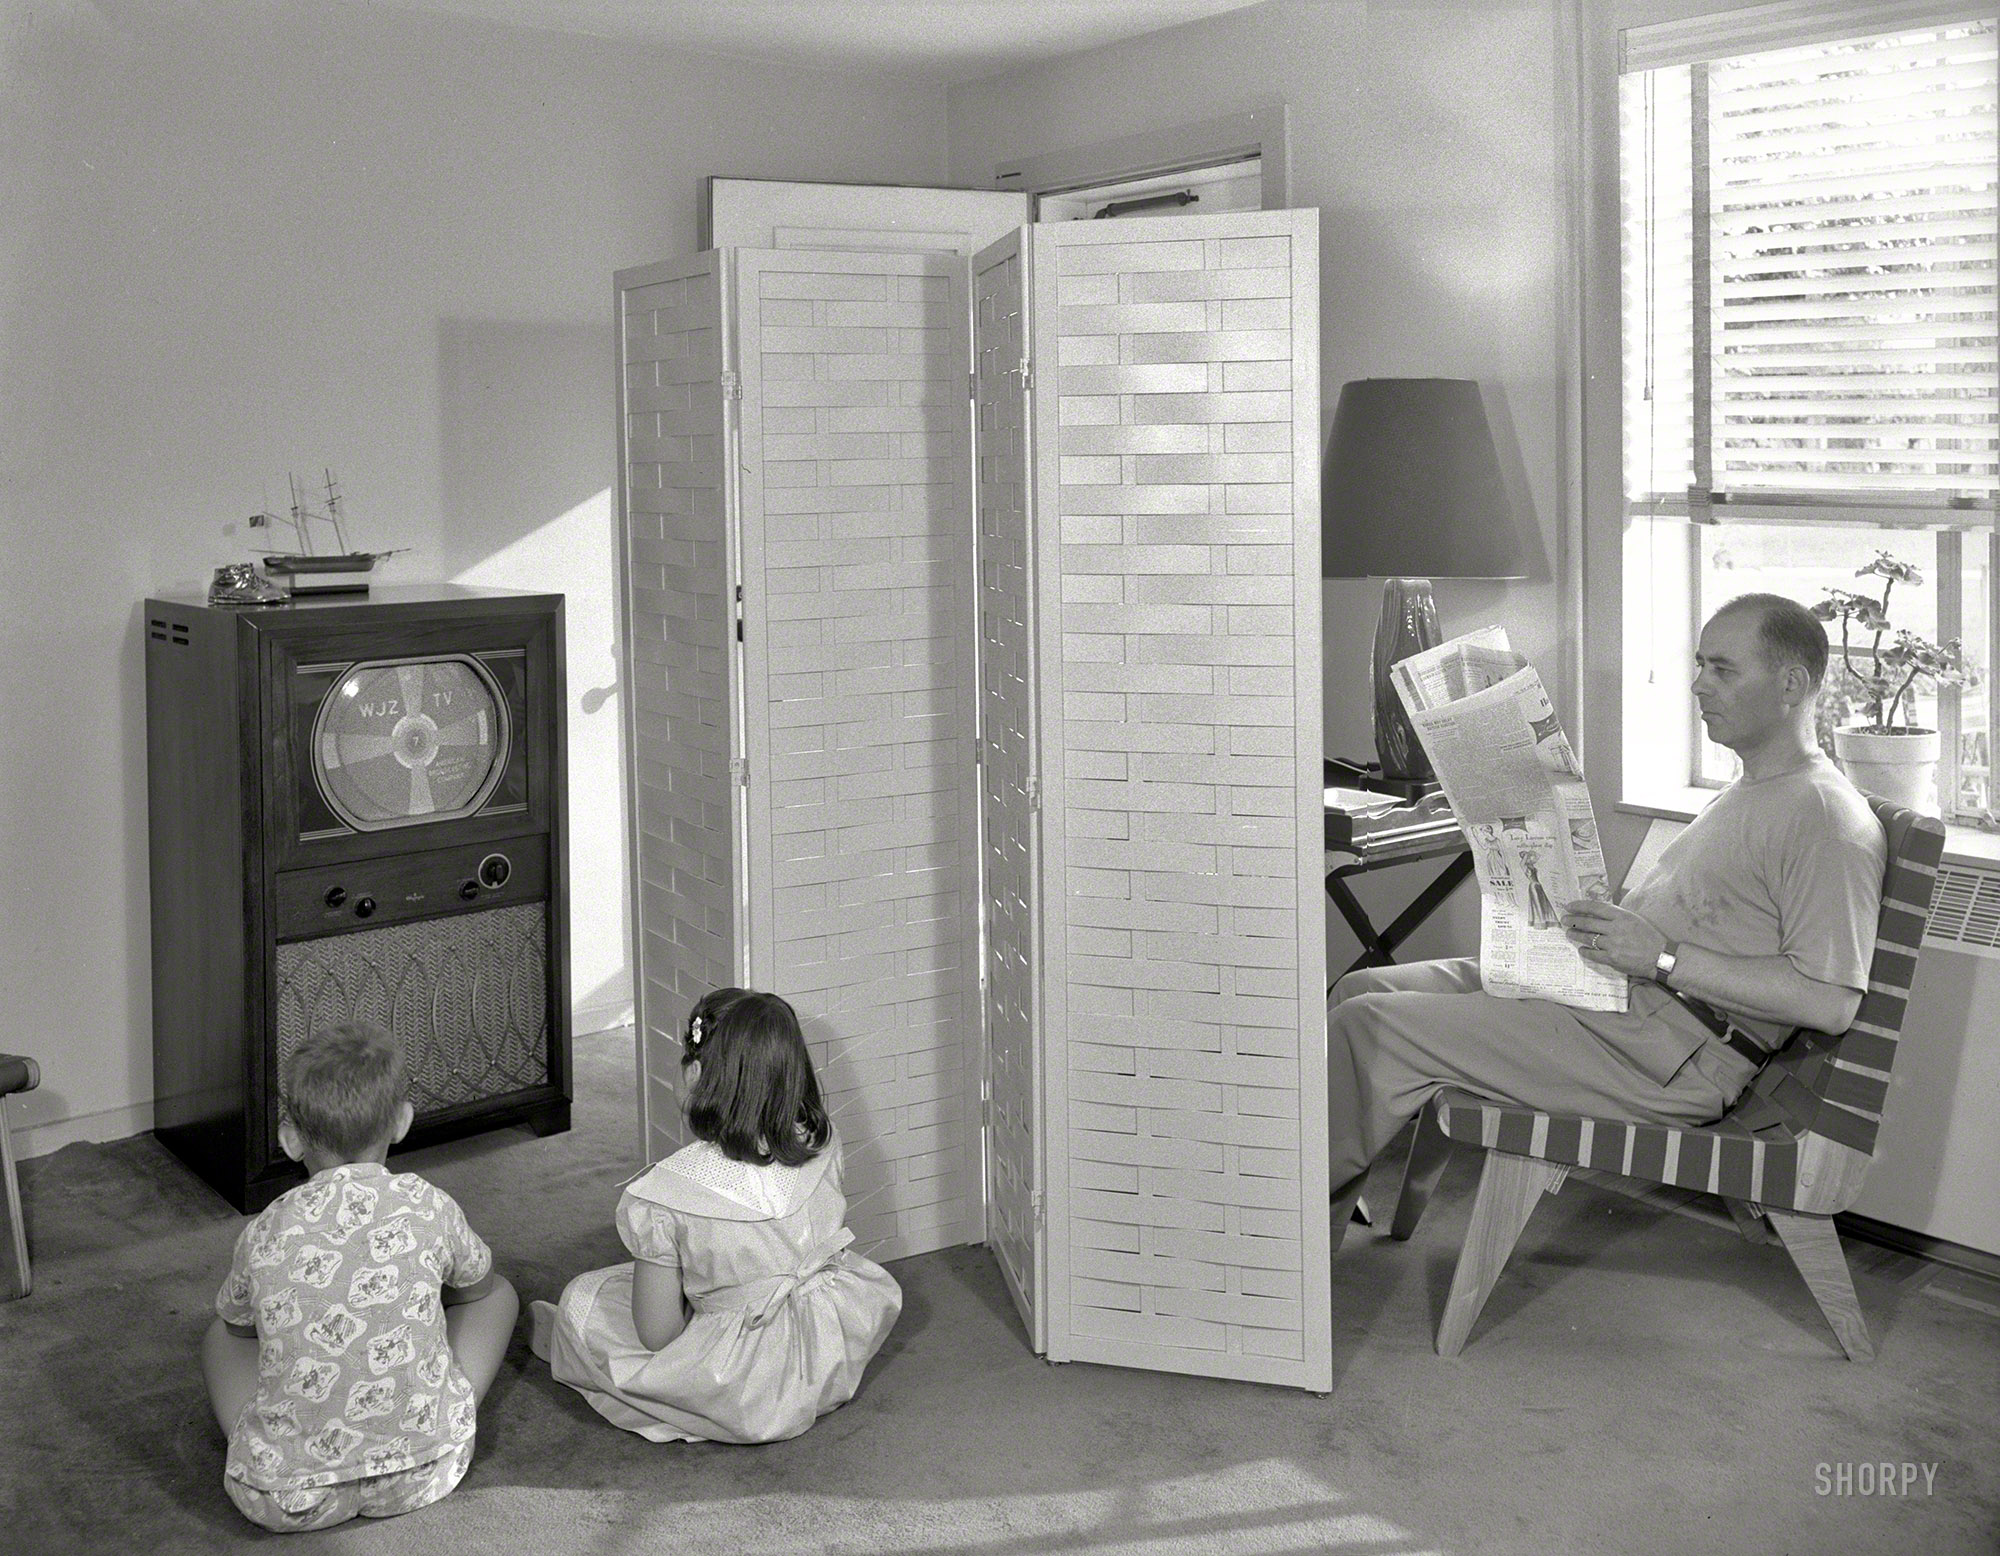 July 12, 1950. "Hilda Kassell, East 53rd Street, New York City. Father reading newspaper, two children viewing television." The test-pattern tone is especially hypnotic this morning. Photo by Gottscho-Schleisner. View full size.
